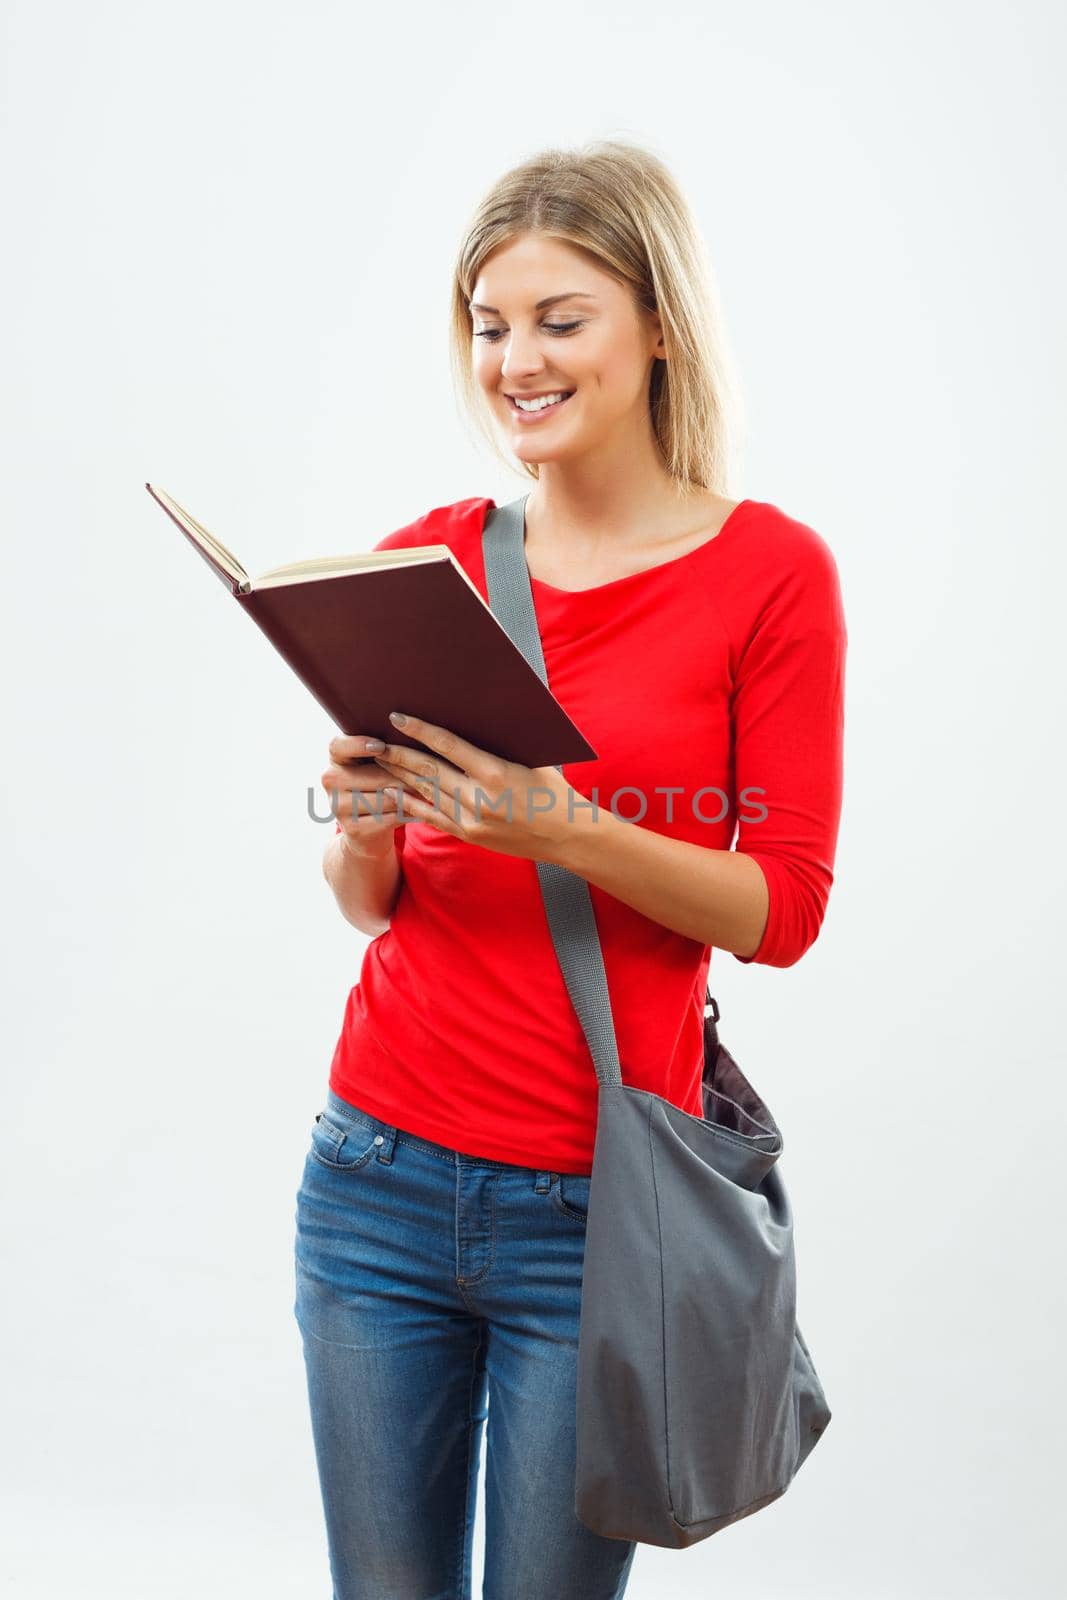 Image of female student reading a book.